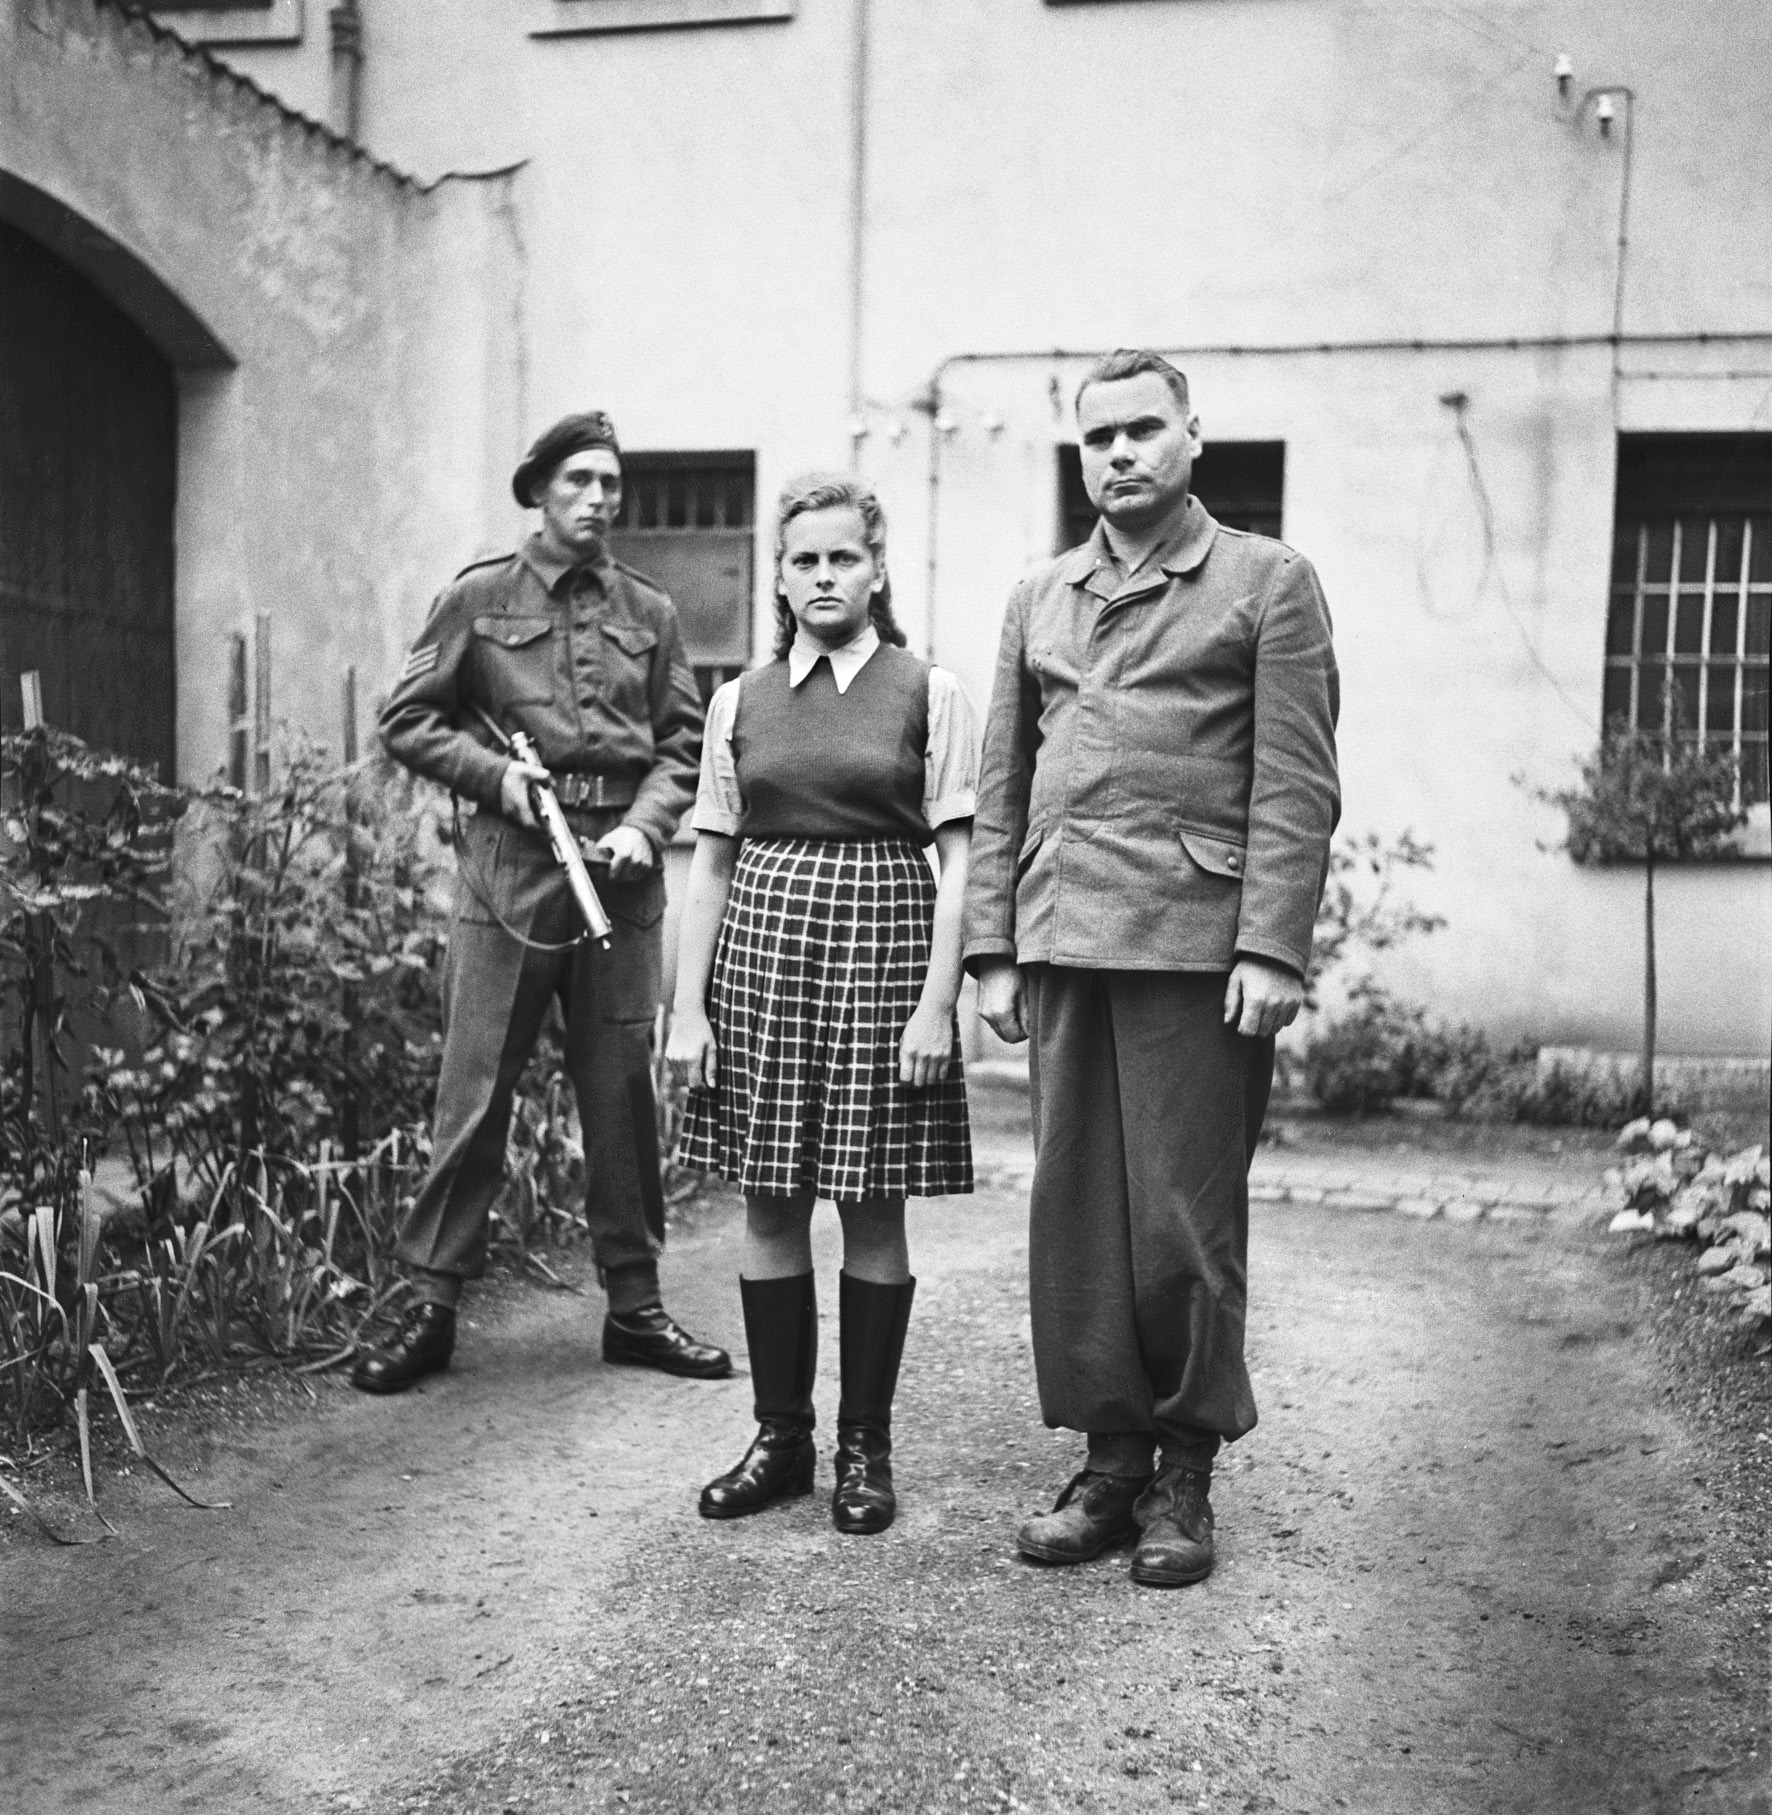 In jackboots and civilian clothes, Irma Grese (along with Bergen-Belsen commandant Josef Kramer, right) stands in the courtyard of the prison at Celle during their war-crimes trial, June 1945.